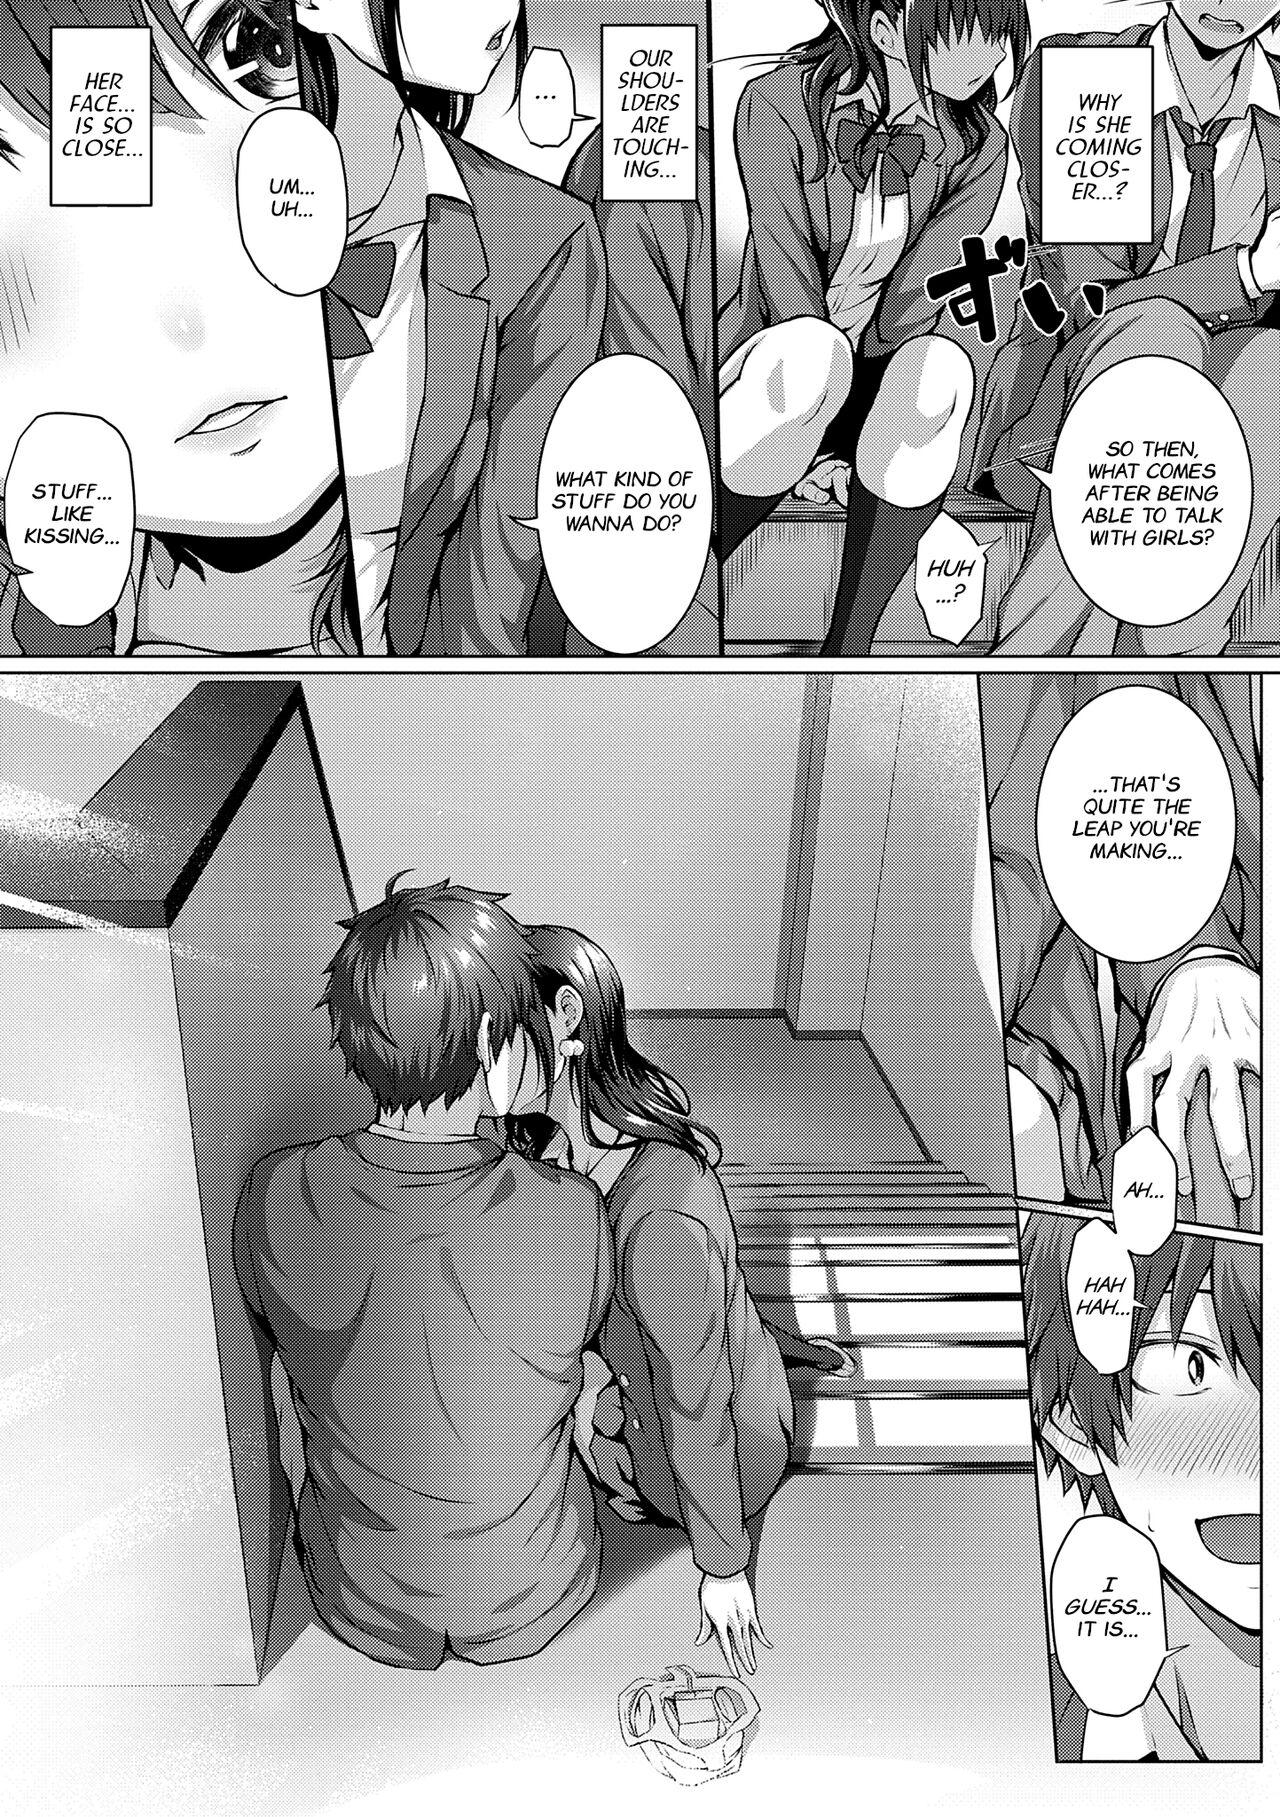 Selfie Flag Kaishuu wa Totsuzen ni | The Puzzle Pieces Are Suddenly Coming Together Amatuer - Page 7